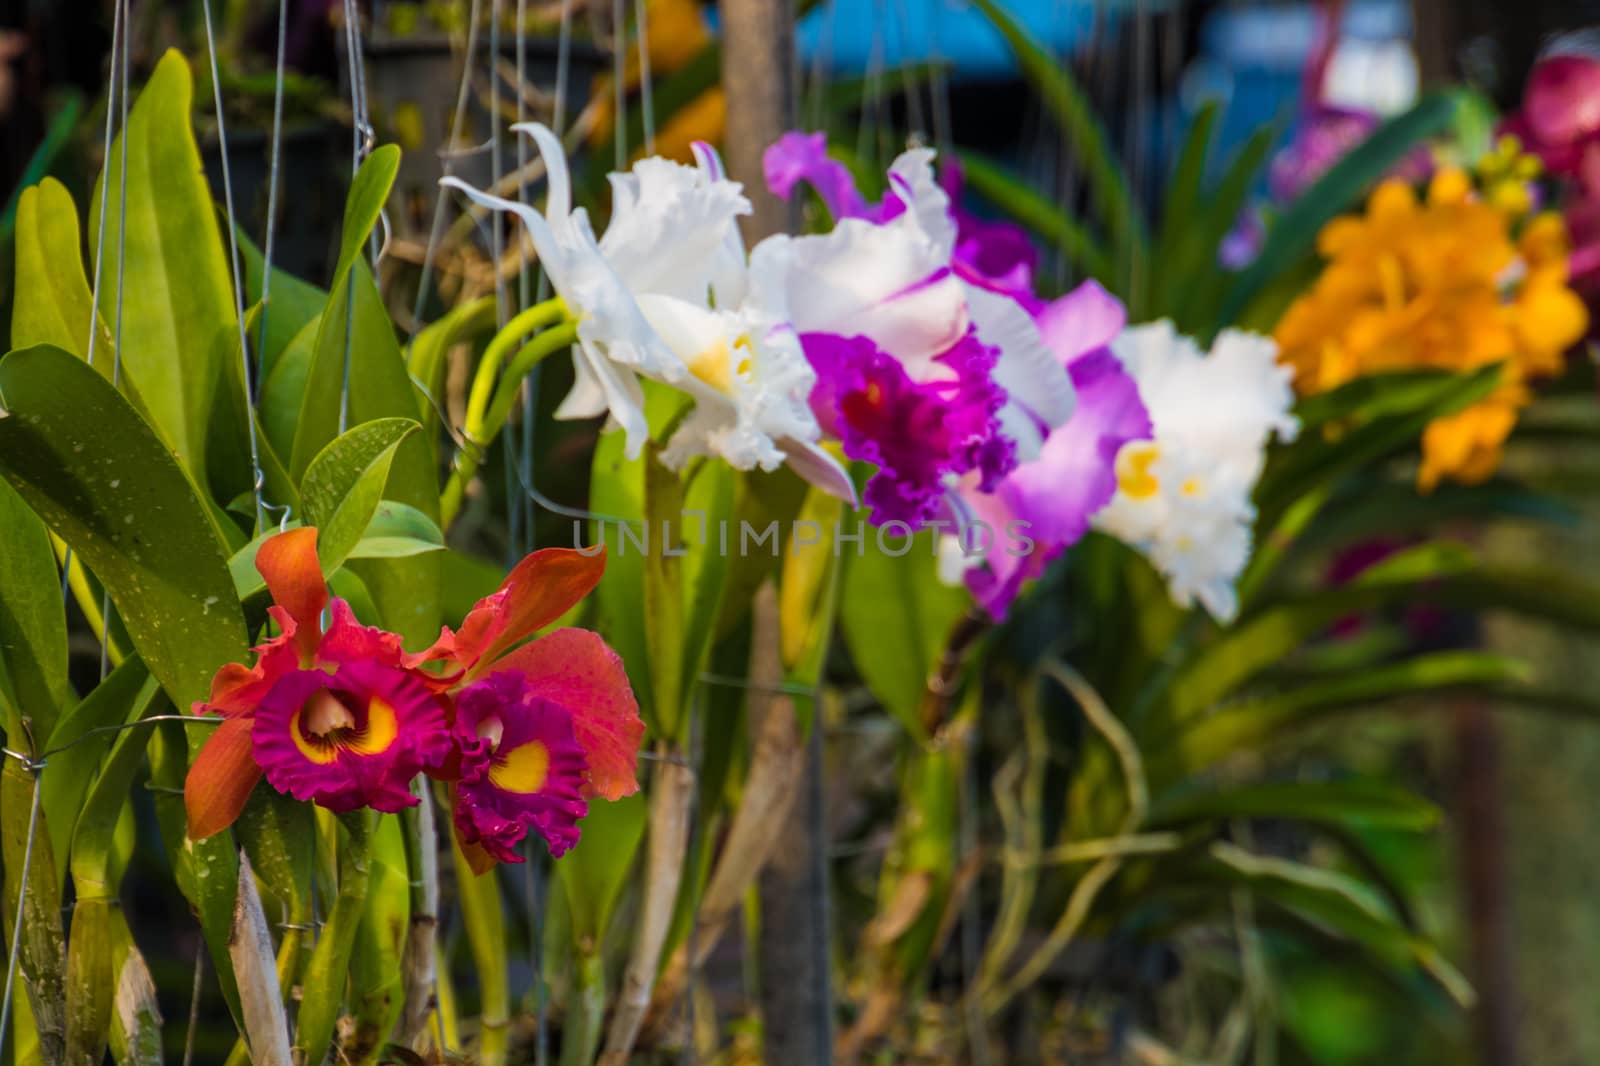 Orchids red, purple, white, yellow sold on Thai flower market